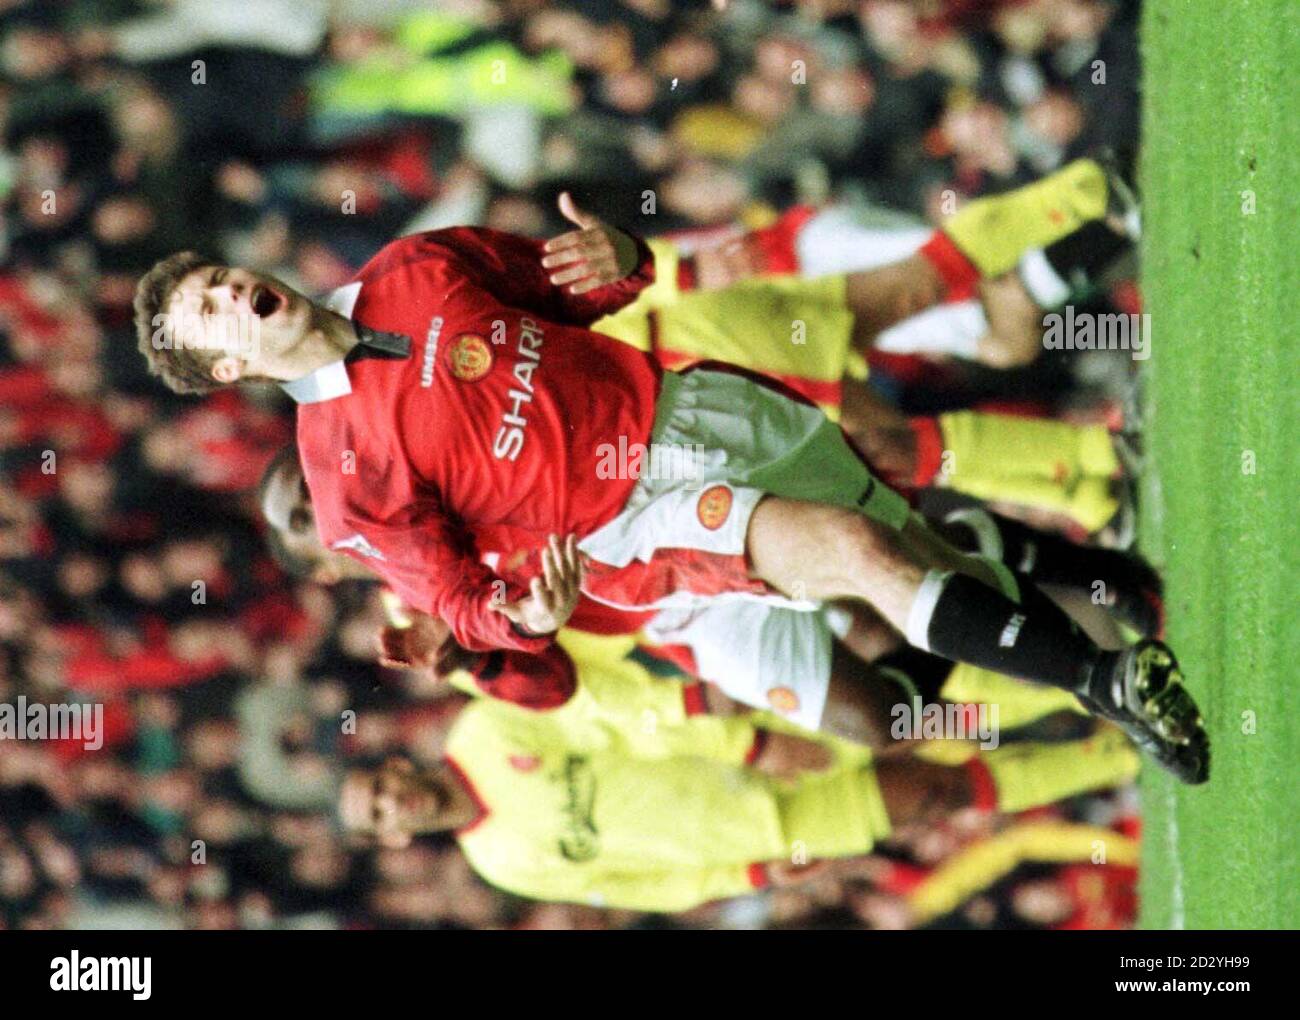 Manchester Utd's Ronny Johnsen celebrates his early goal in the crucial Premiership match with Liverpool at Old Trafford today (Friday) PHTO OWEN HUMPHREYS/PA Stock Photo